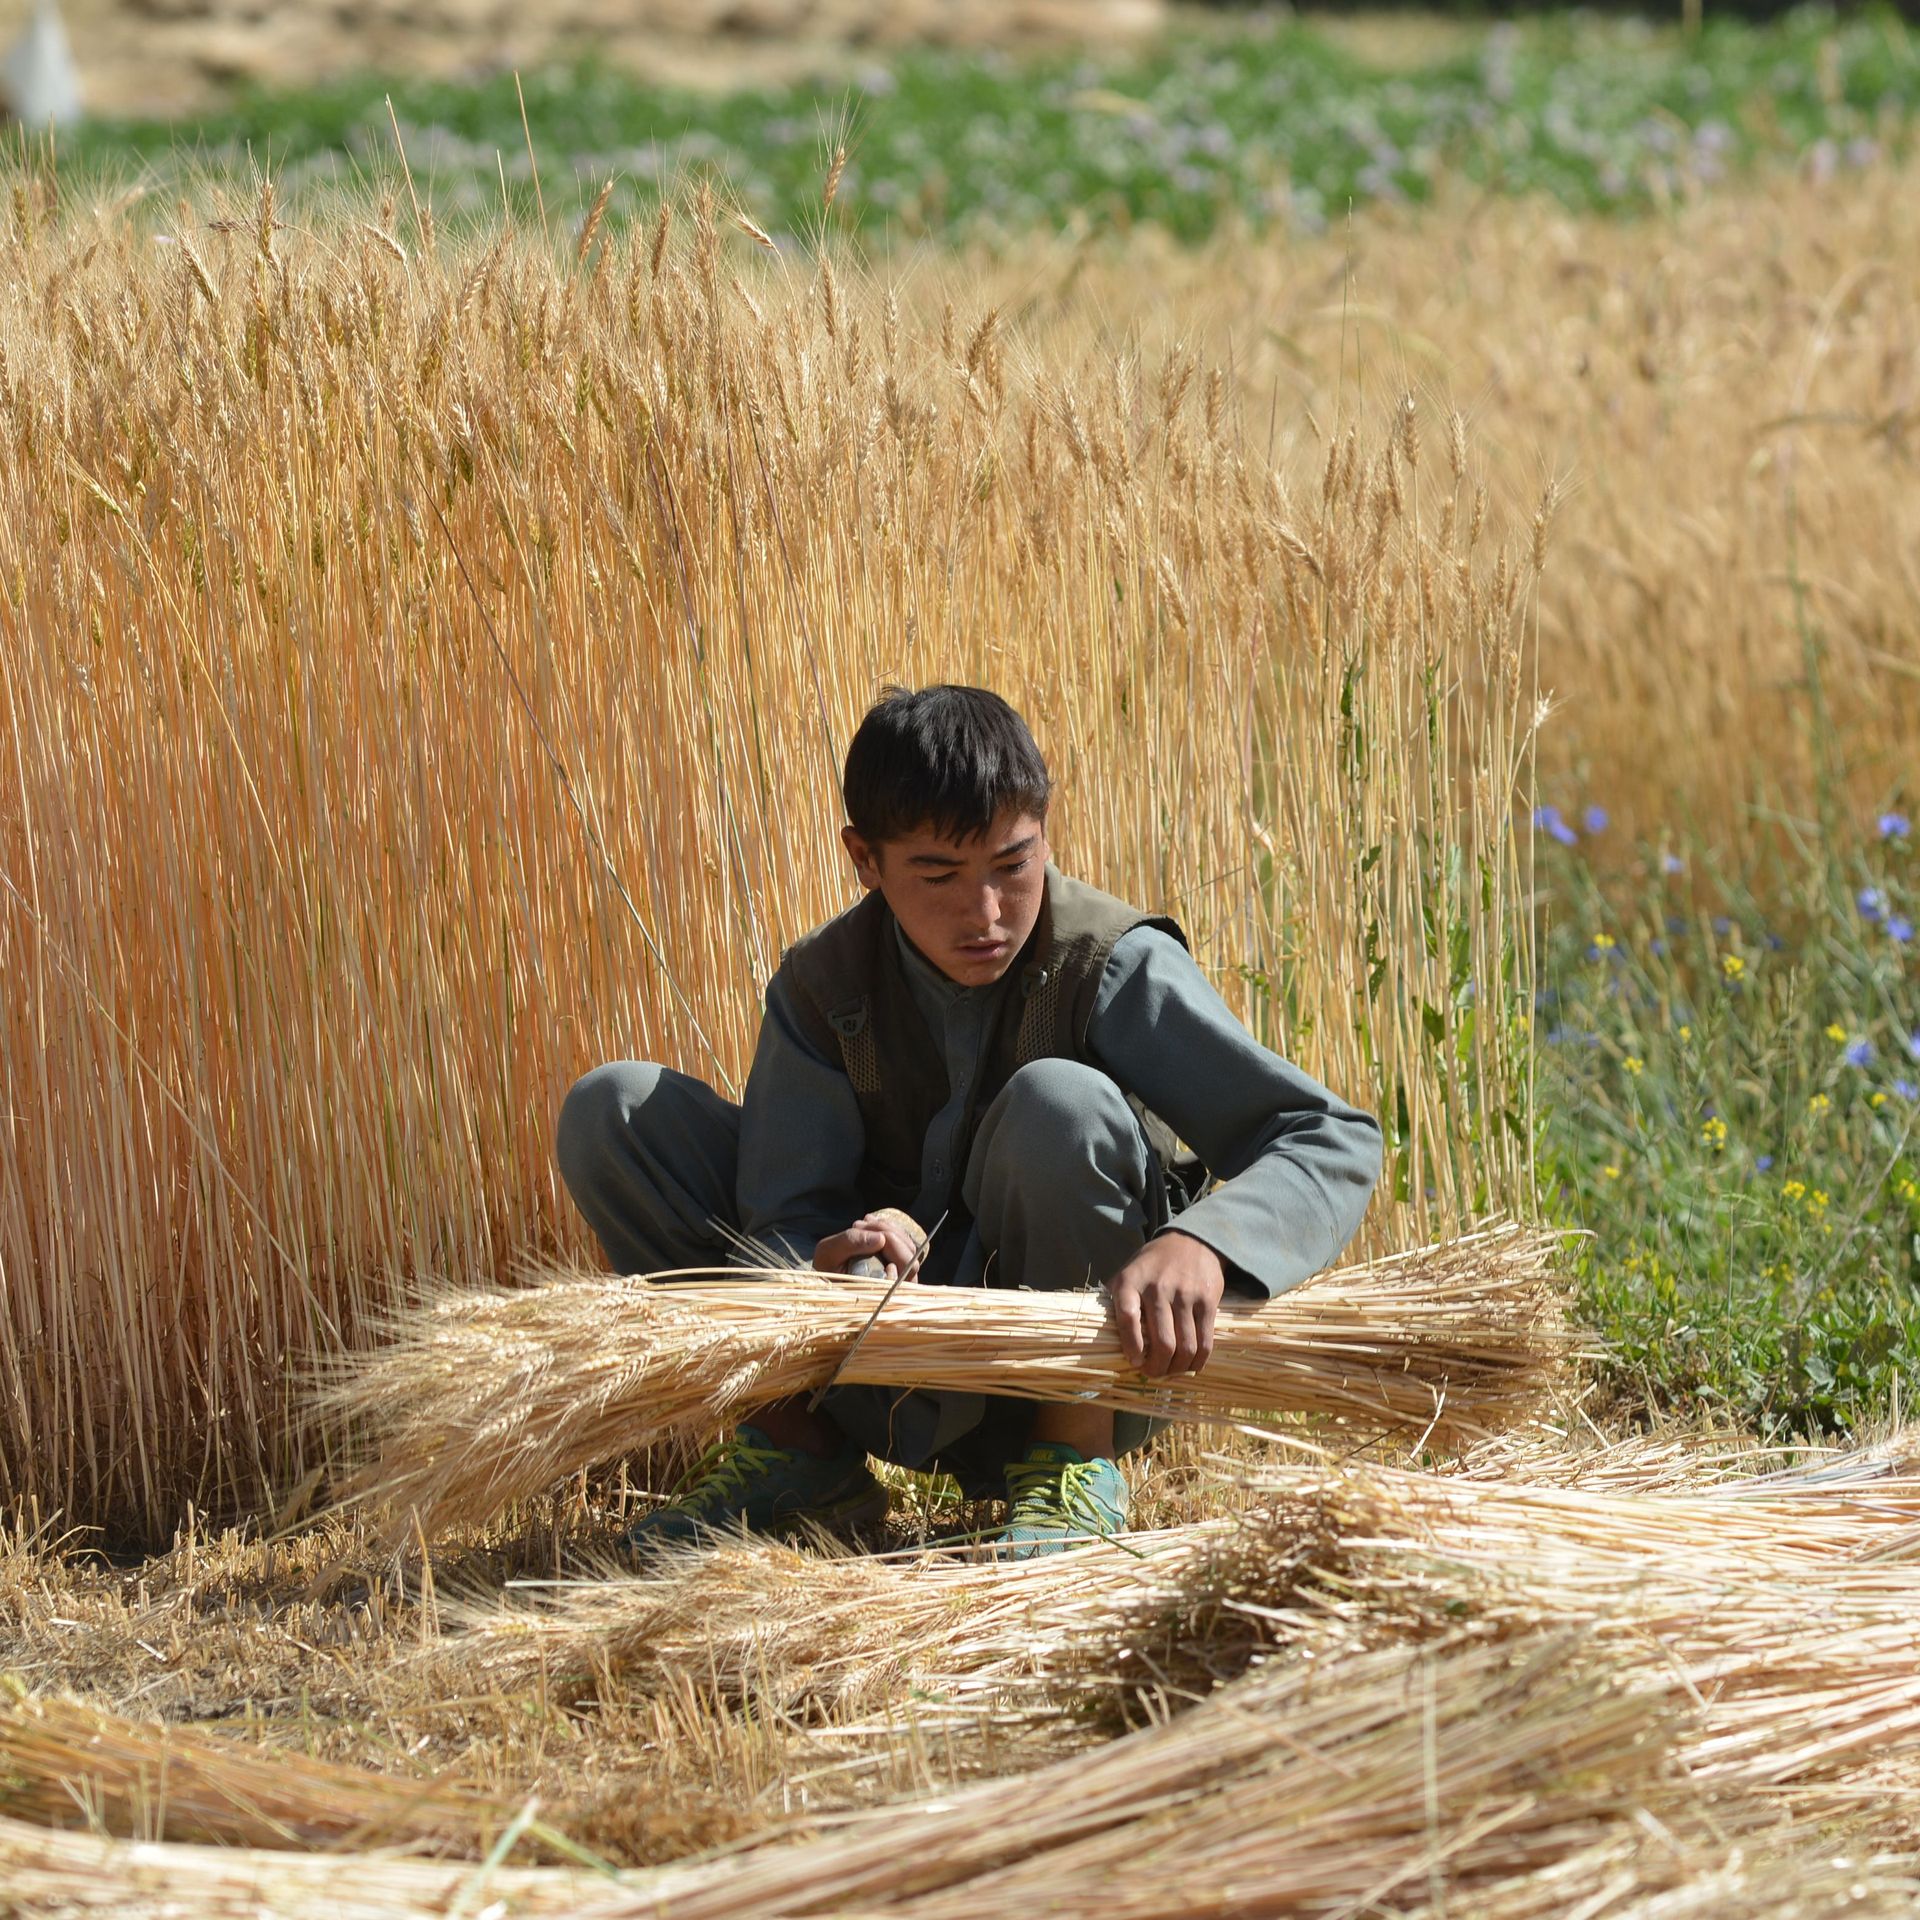 A person harvesting a wheat field in Bamiyan province in July 2022.